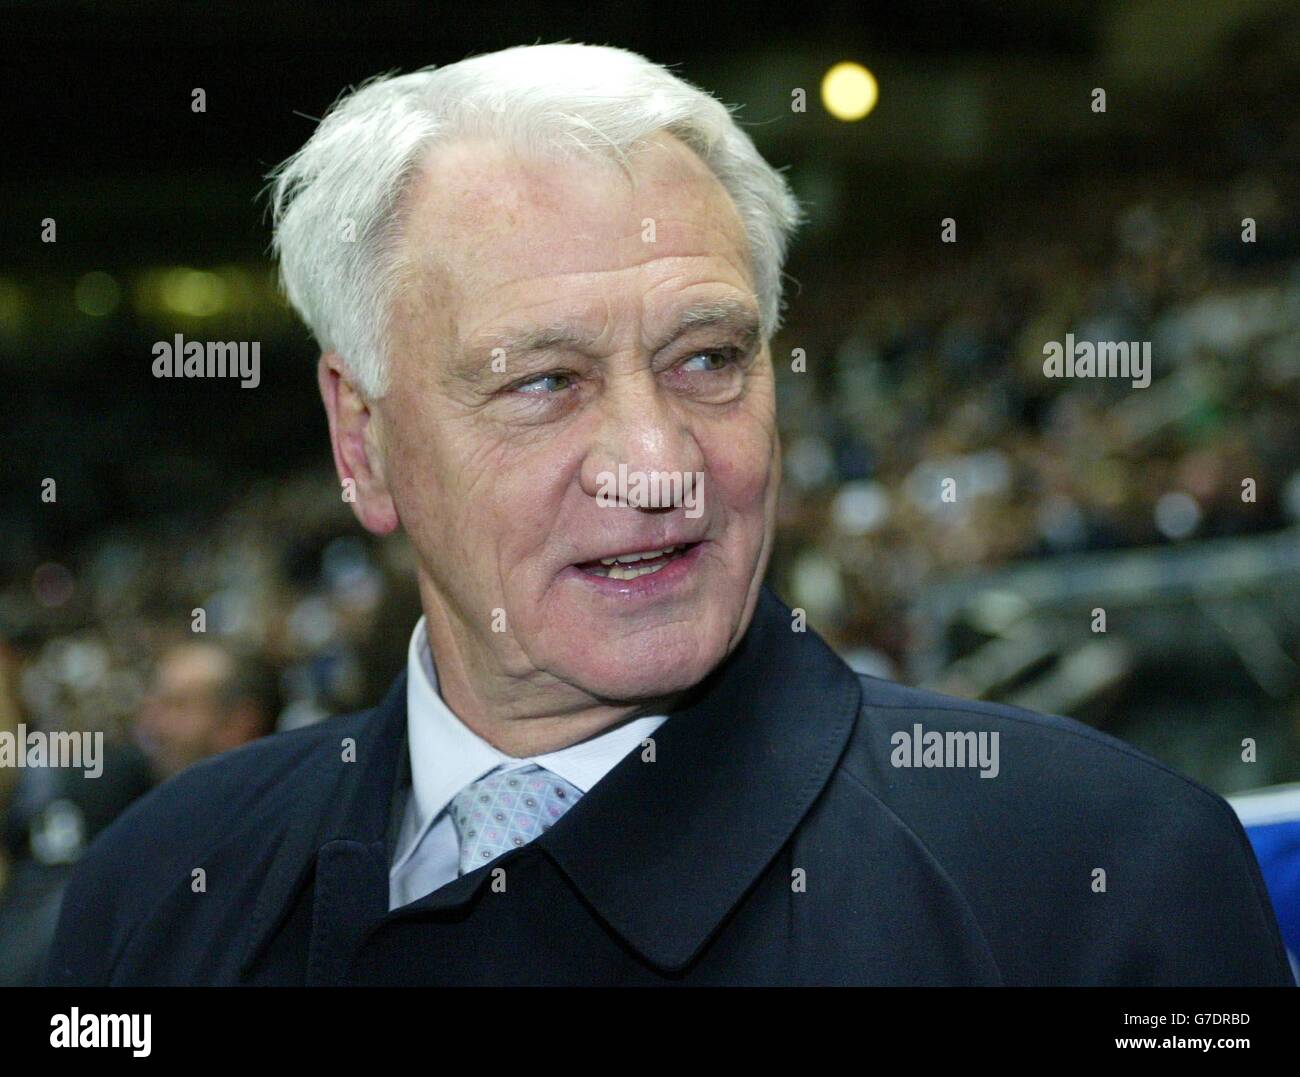 Bobby Robson during Sky One's 'The Match' live final played between a celebrity team and a Football Legends XI at St James' Park in Newcastle. Stock Photo